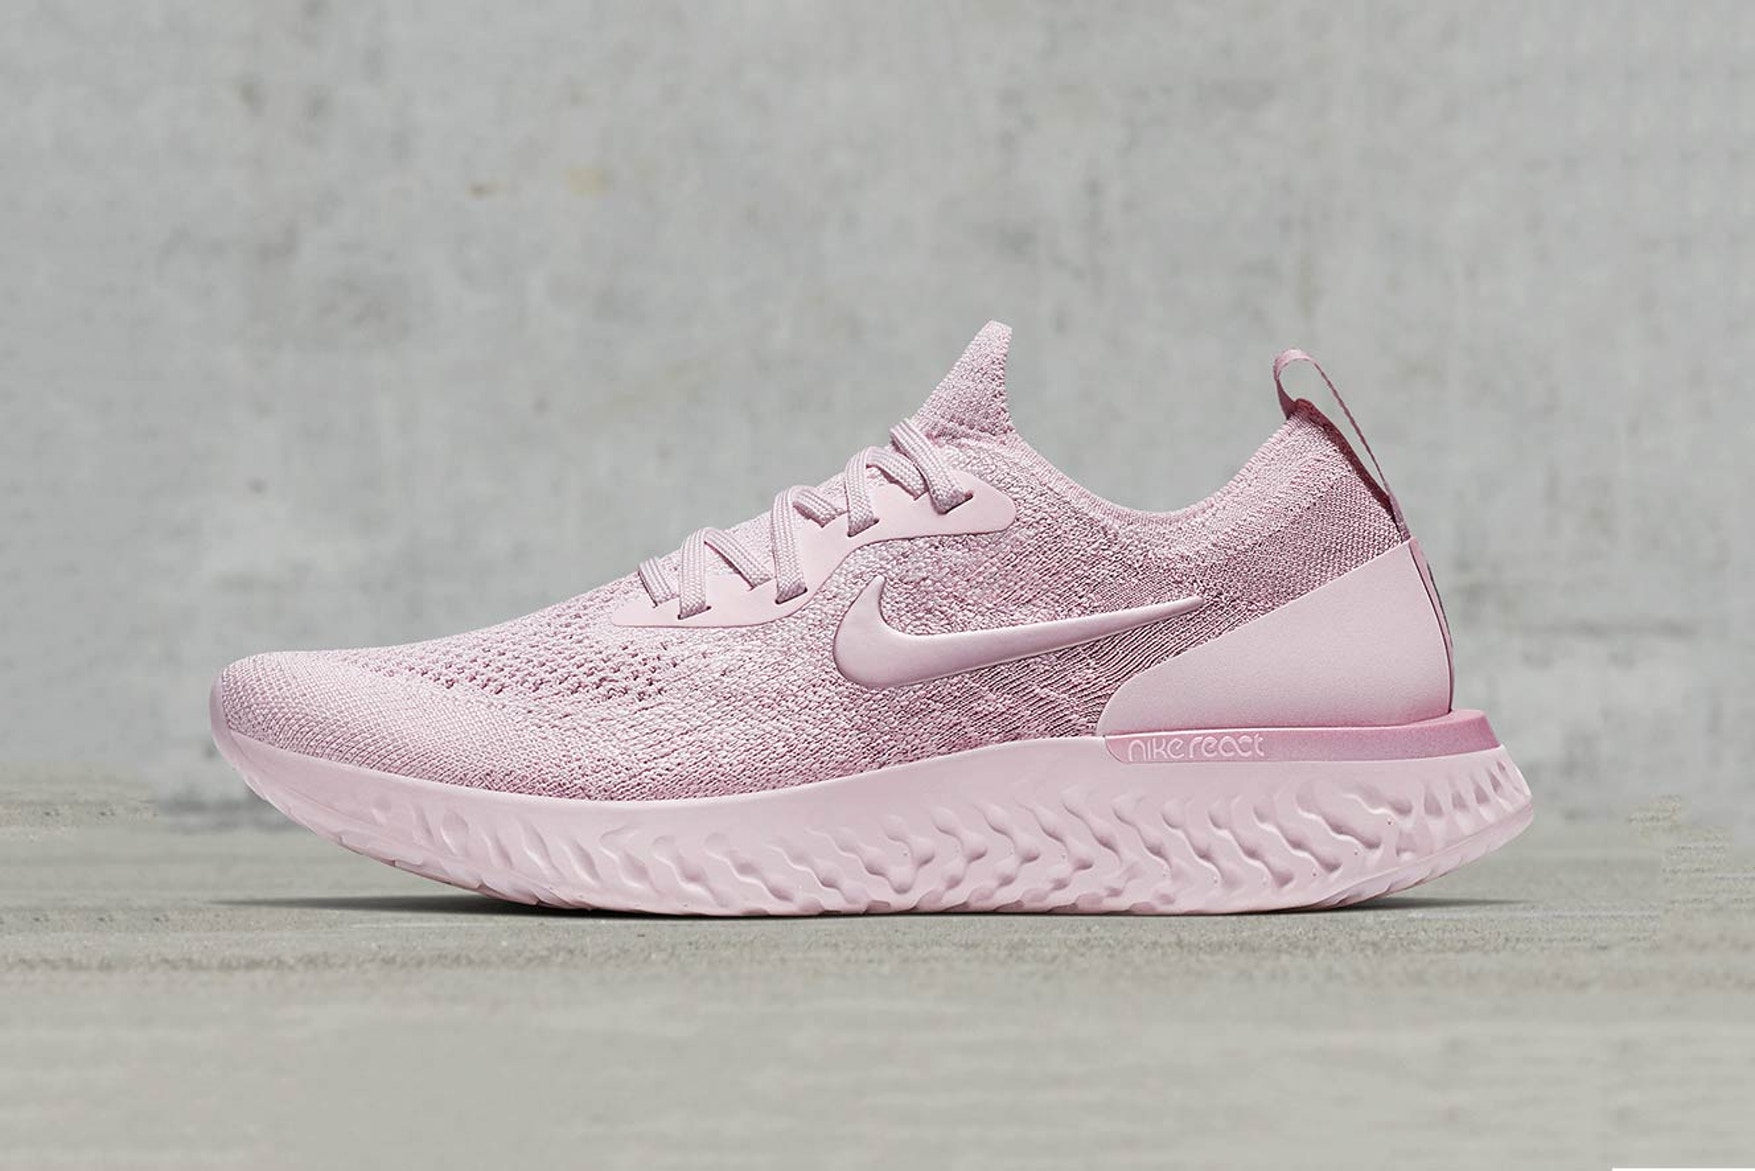 Nike Have Released An Unashamedly 100% Baby Pink Shoe That We Need